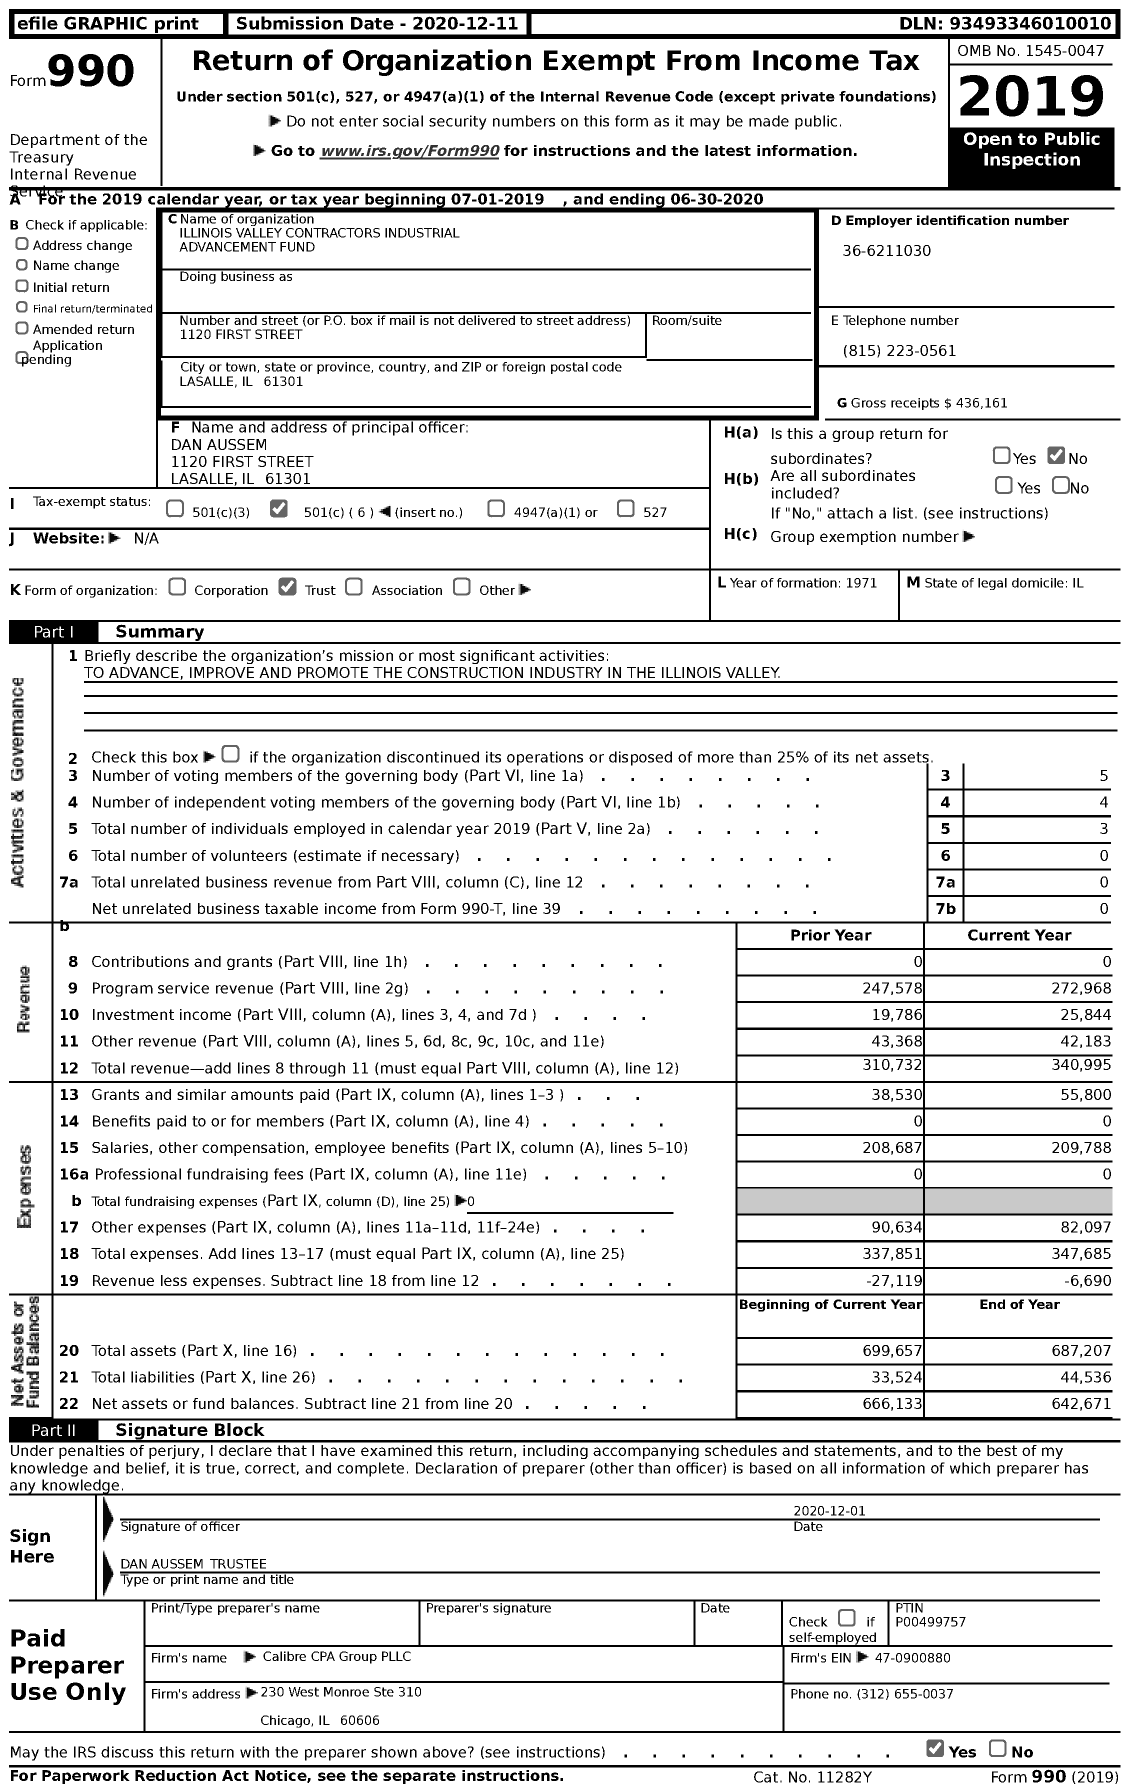 Image of first page of 2019 Form 990 for Illinois Valley Contractors Industrial Advancement Fund